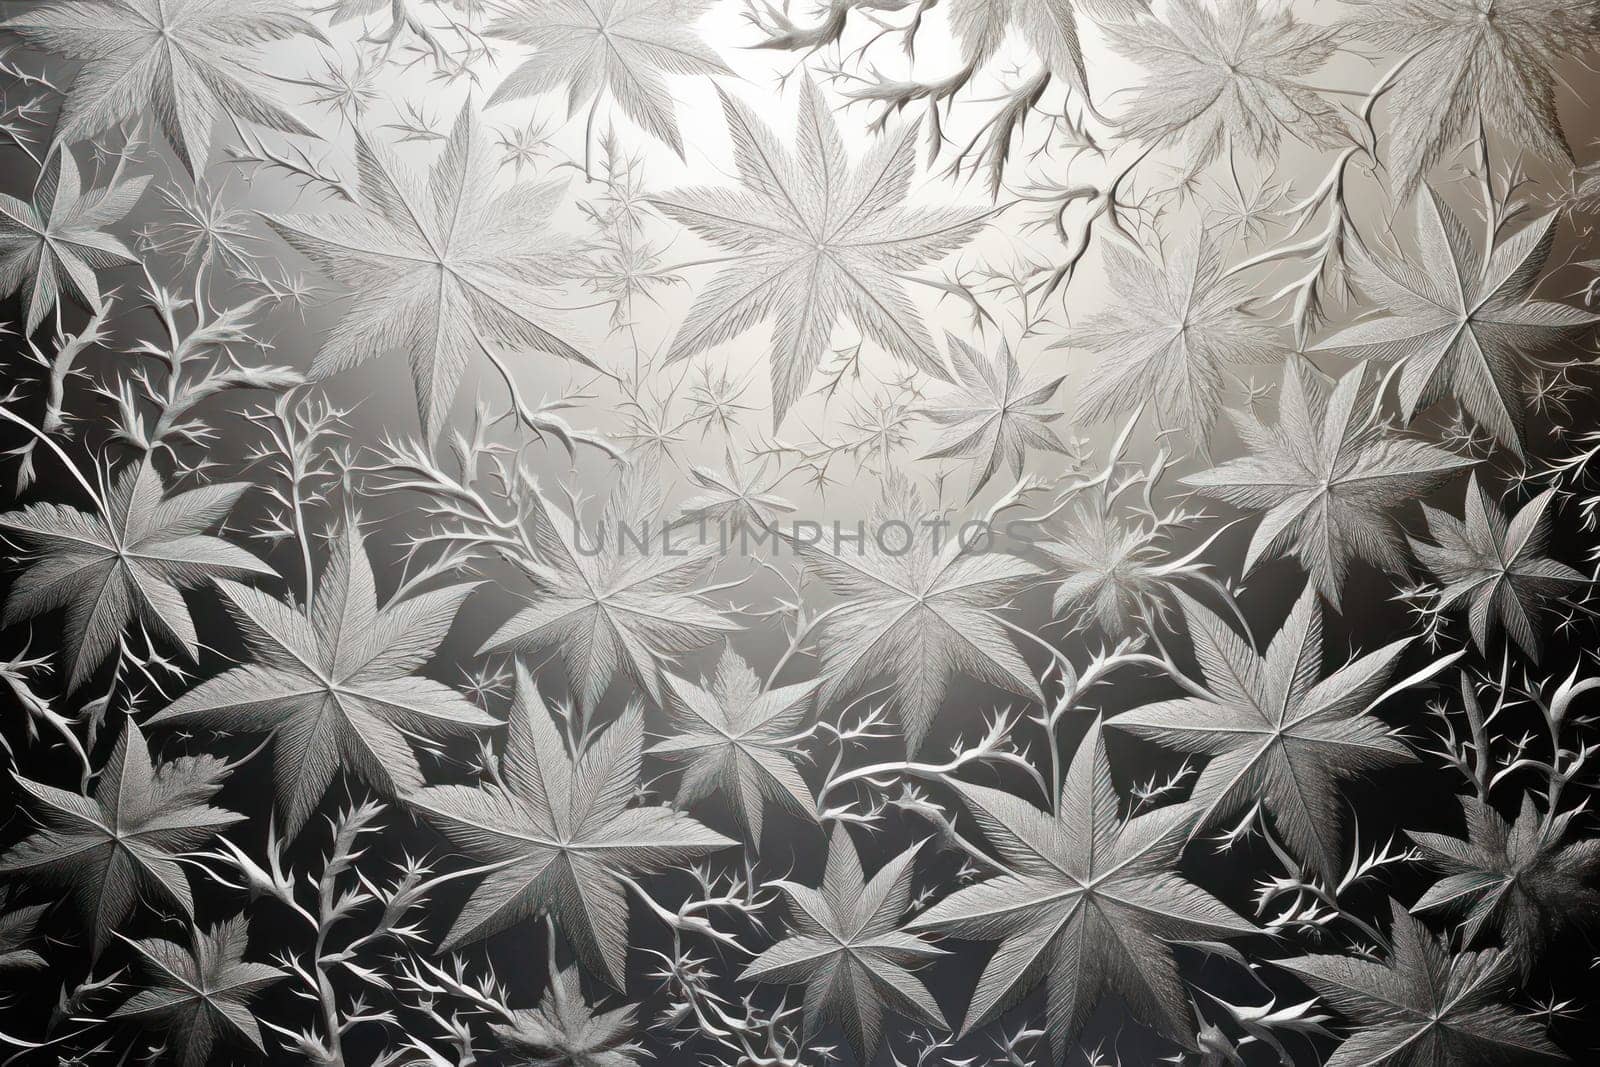 A mesmerizing exploration of winter's artistic side, unveiling captivating abstract patterns etched in the delicate intricacies of snow and frost on various surfaces.